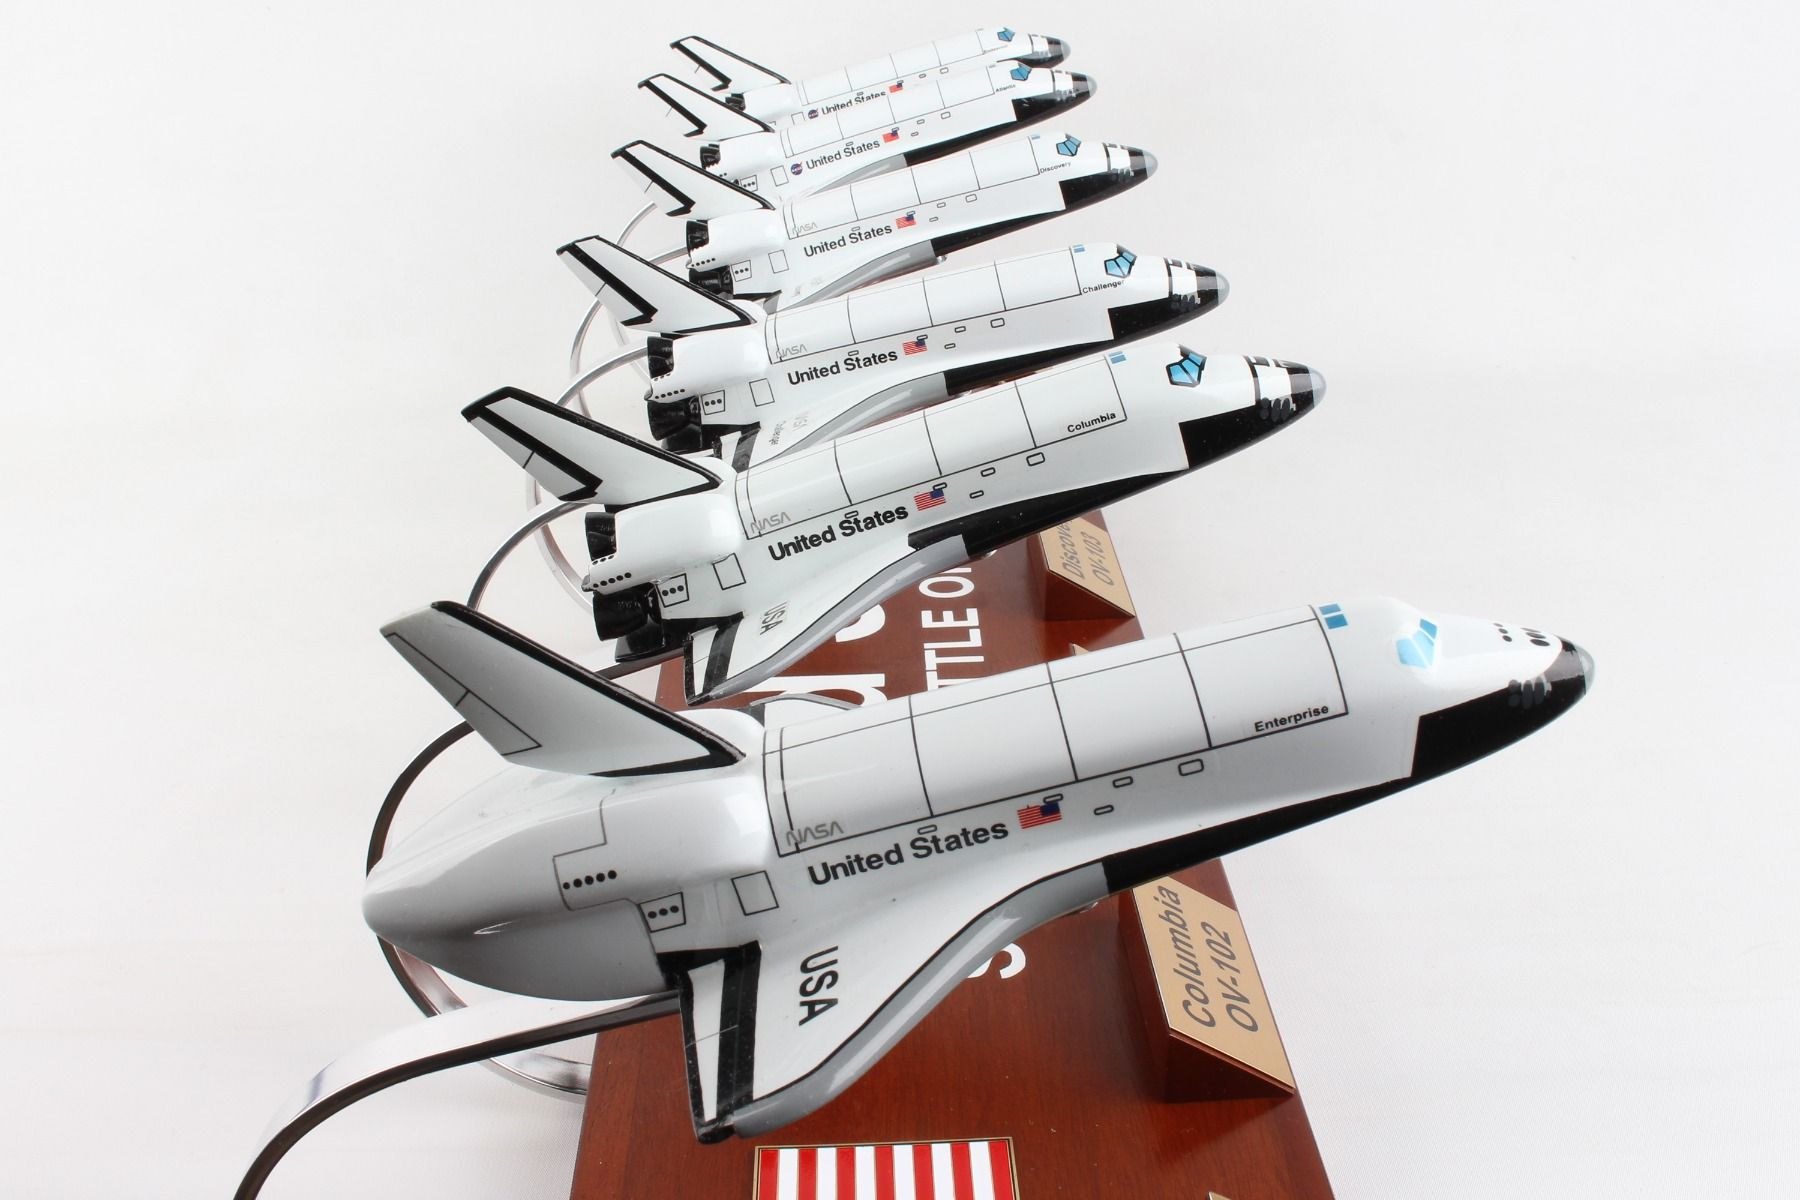 ALDO Hobbies & Creative Arts> Collectibles> Scale Model 7.00" long x 4.50" wide Each / NEW / wood NASA US Space Shuttles Orbiters Collection Enterprise, Columbia, Challenger, Discovery, Atlantis, and Endeavour Wood Models Collection